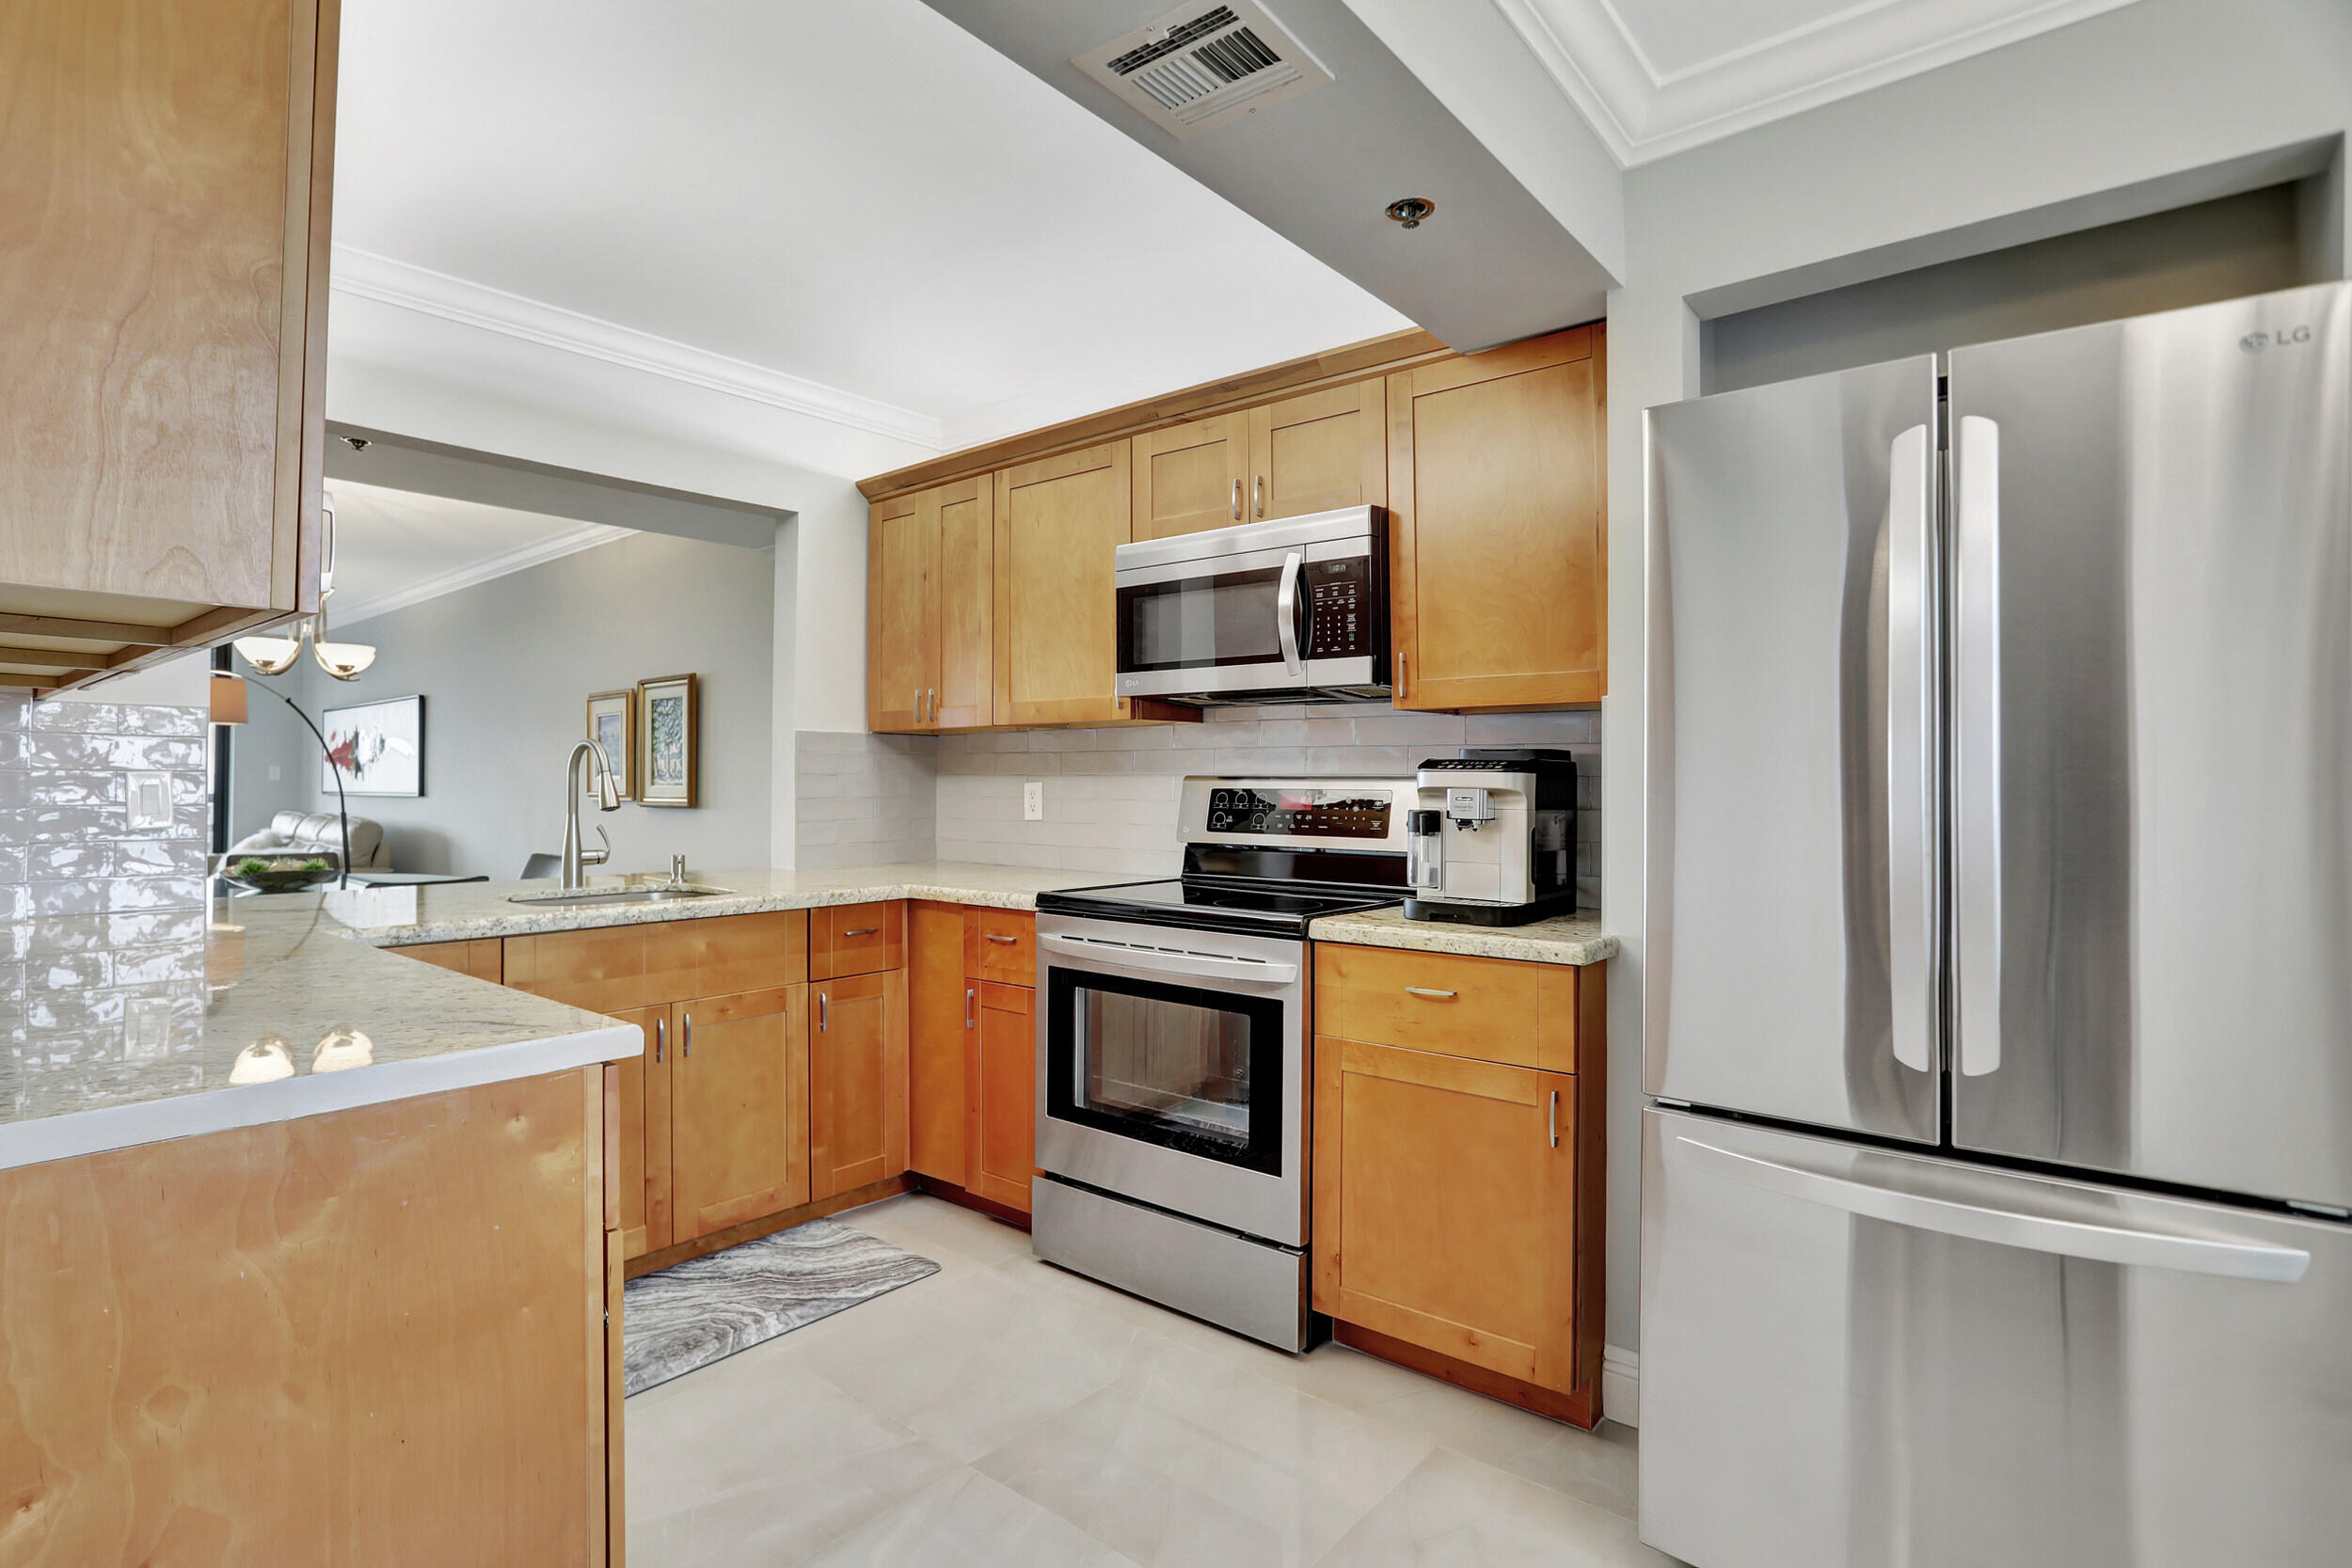 a kitchen with stainless steel appliances granite countertop a refrigerator stove microwave and sink